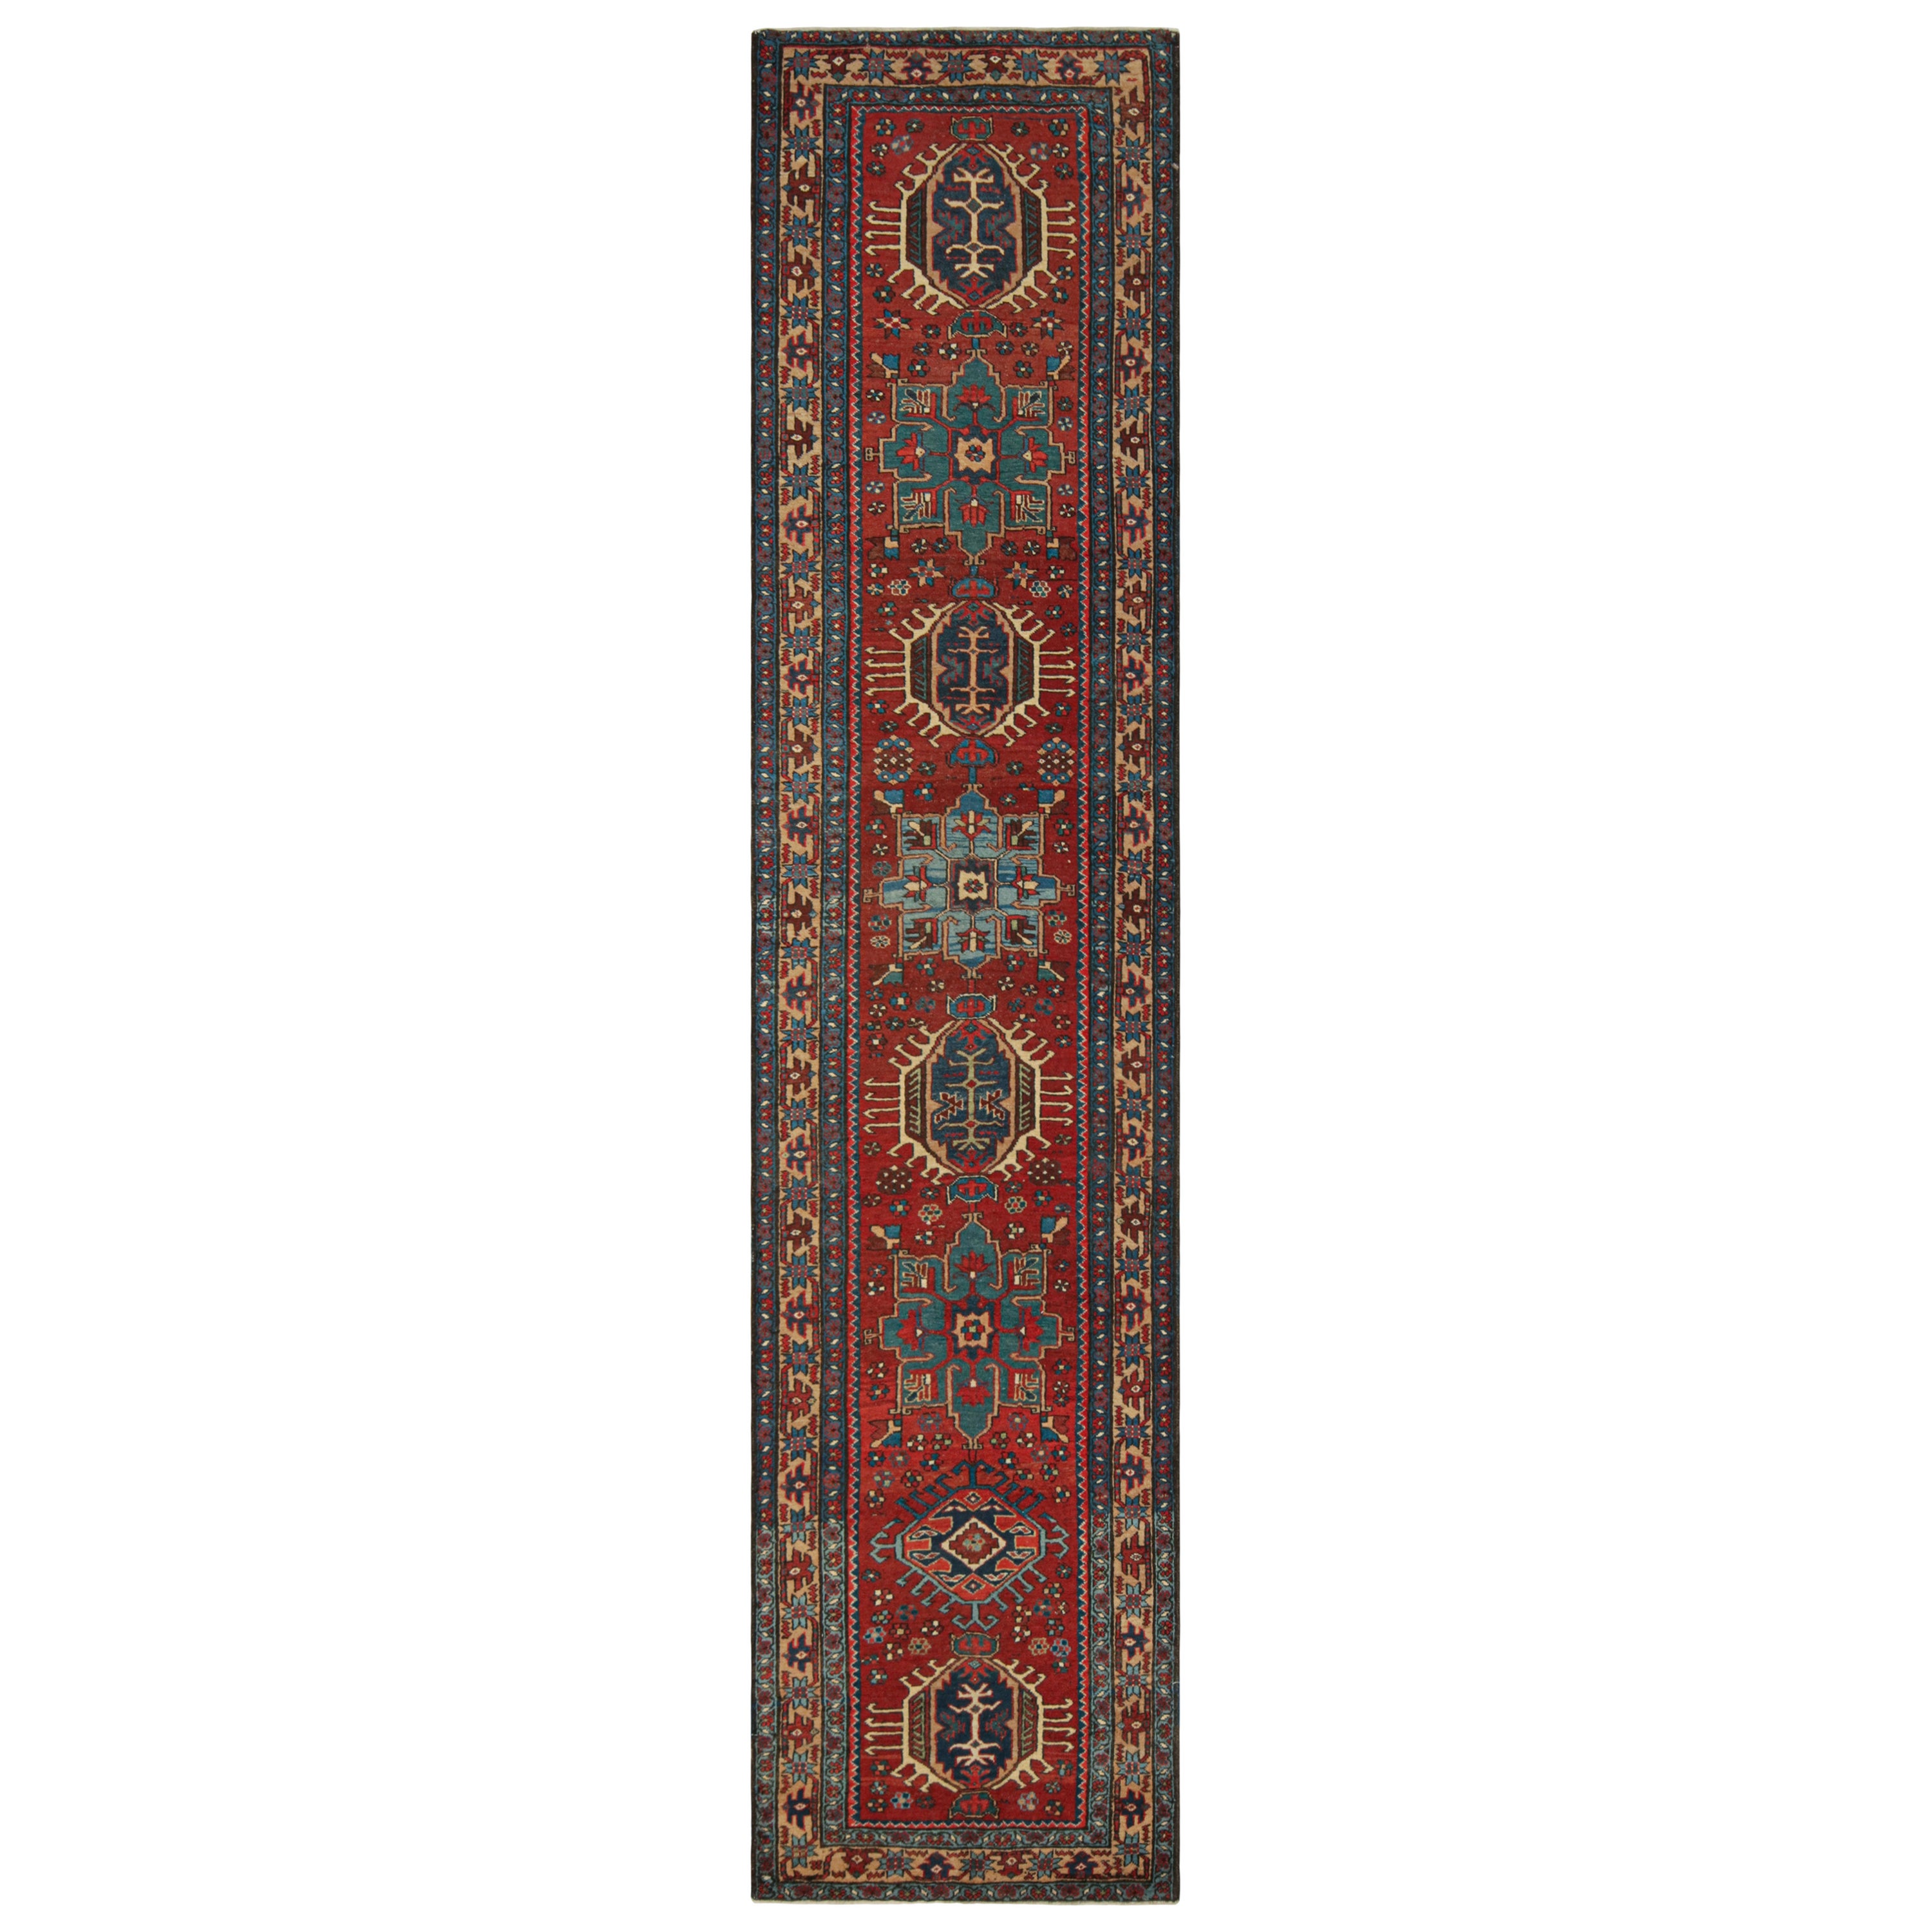 Antique Arraiolos Needlepoint Runner with Floral Medallions, from Rug & Kilim For Sale